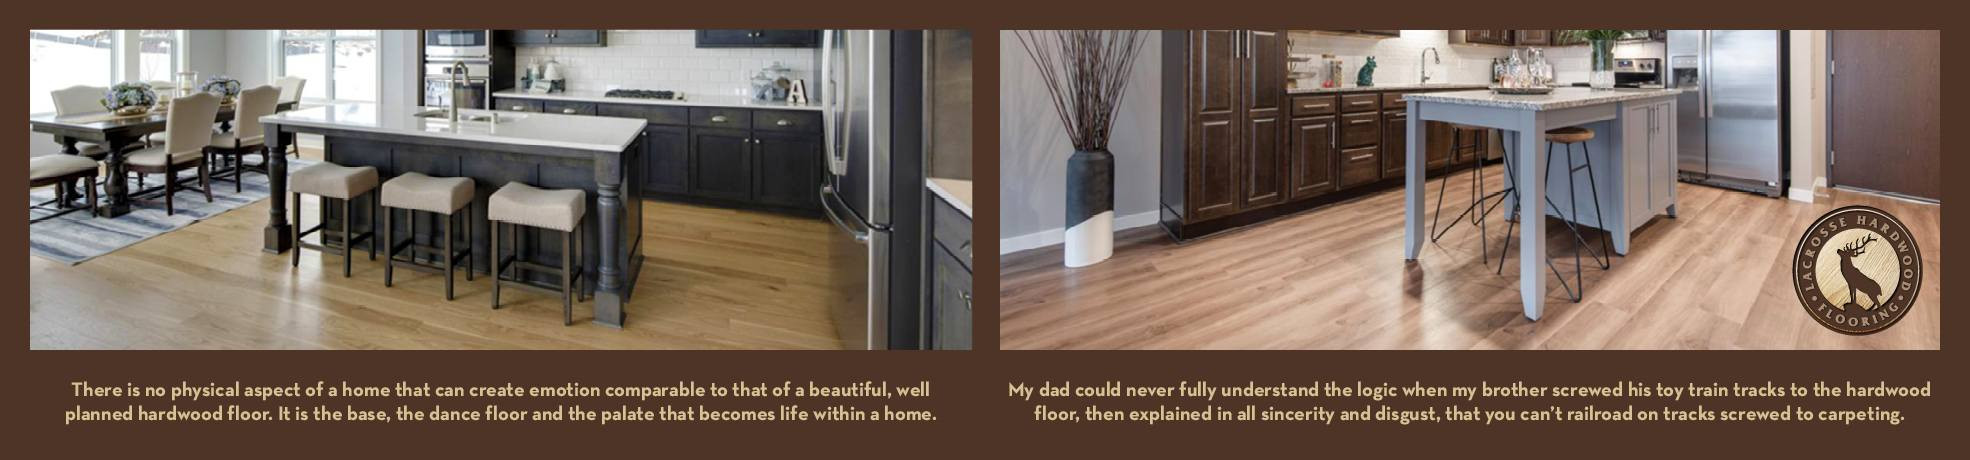 16 Perfect Dark Hardwood Floors with Light Oak Trim 2024 free download dark hardwood floors with light oak trim of 20 2 1 4 unfinished red oak flooring collections best flooring ideas with regard to wood flooring the home depot builder s pride 3 4 x 2 1 4 natur 1